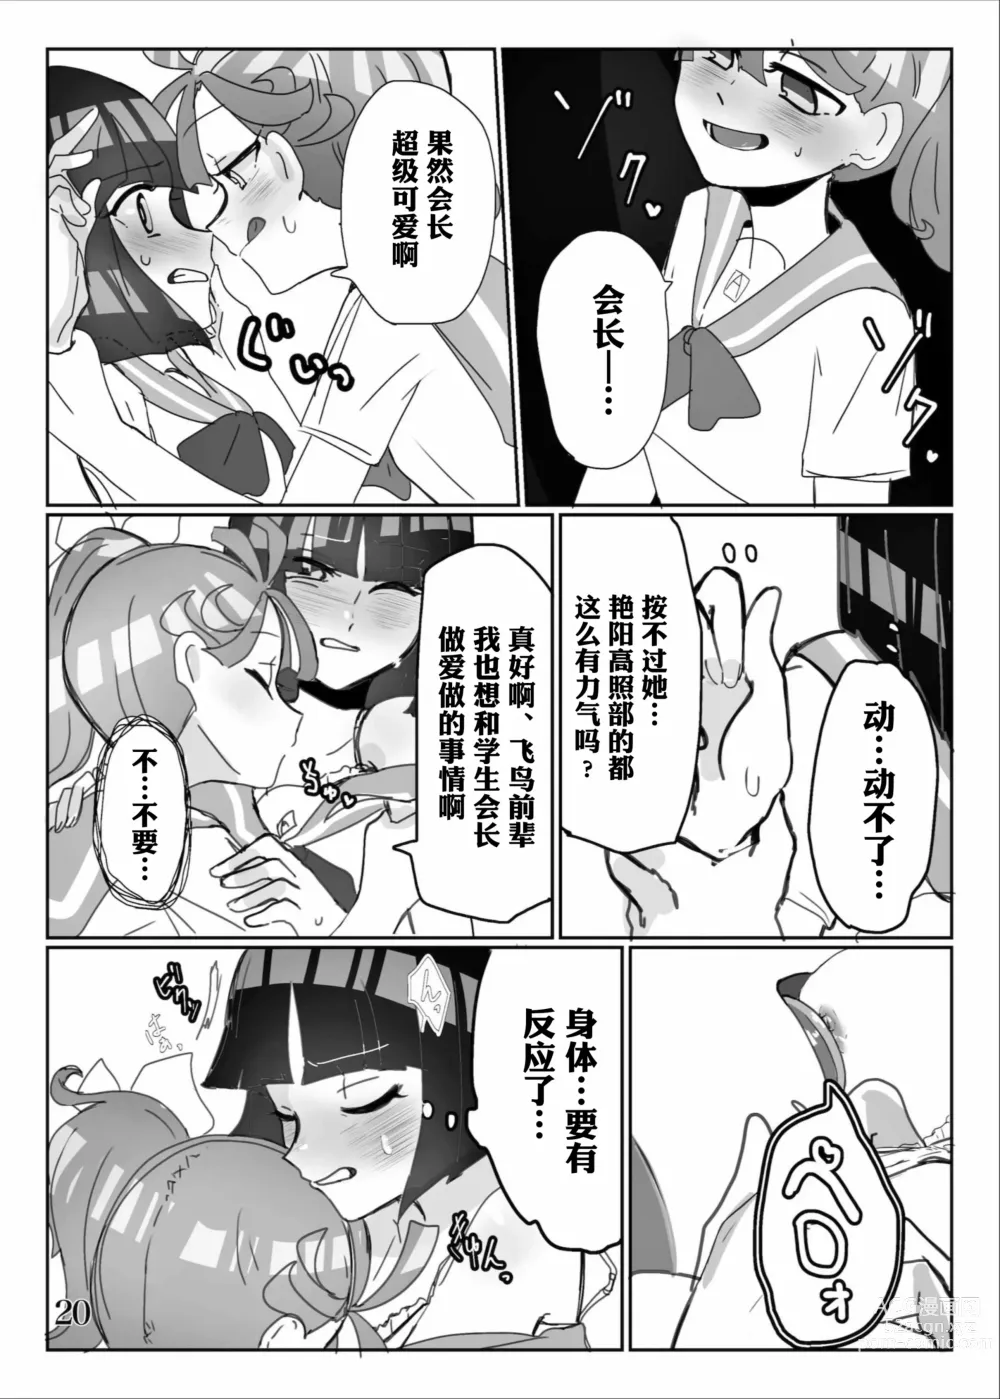 Page 22 of doujinshi 想做能干的孩子♪ DO MY BEST!